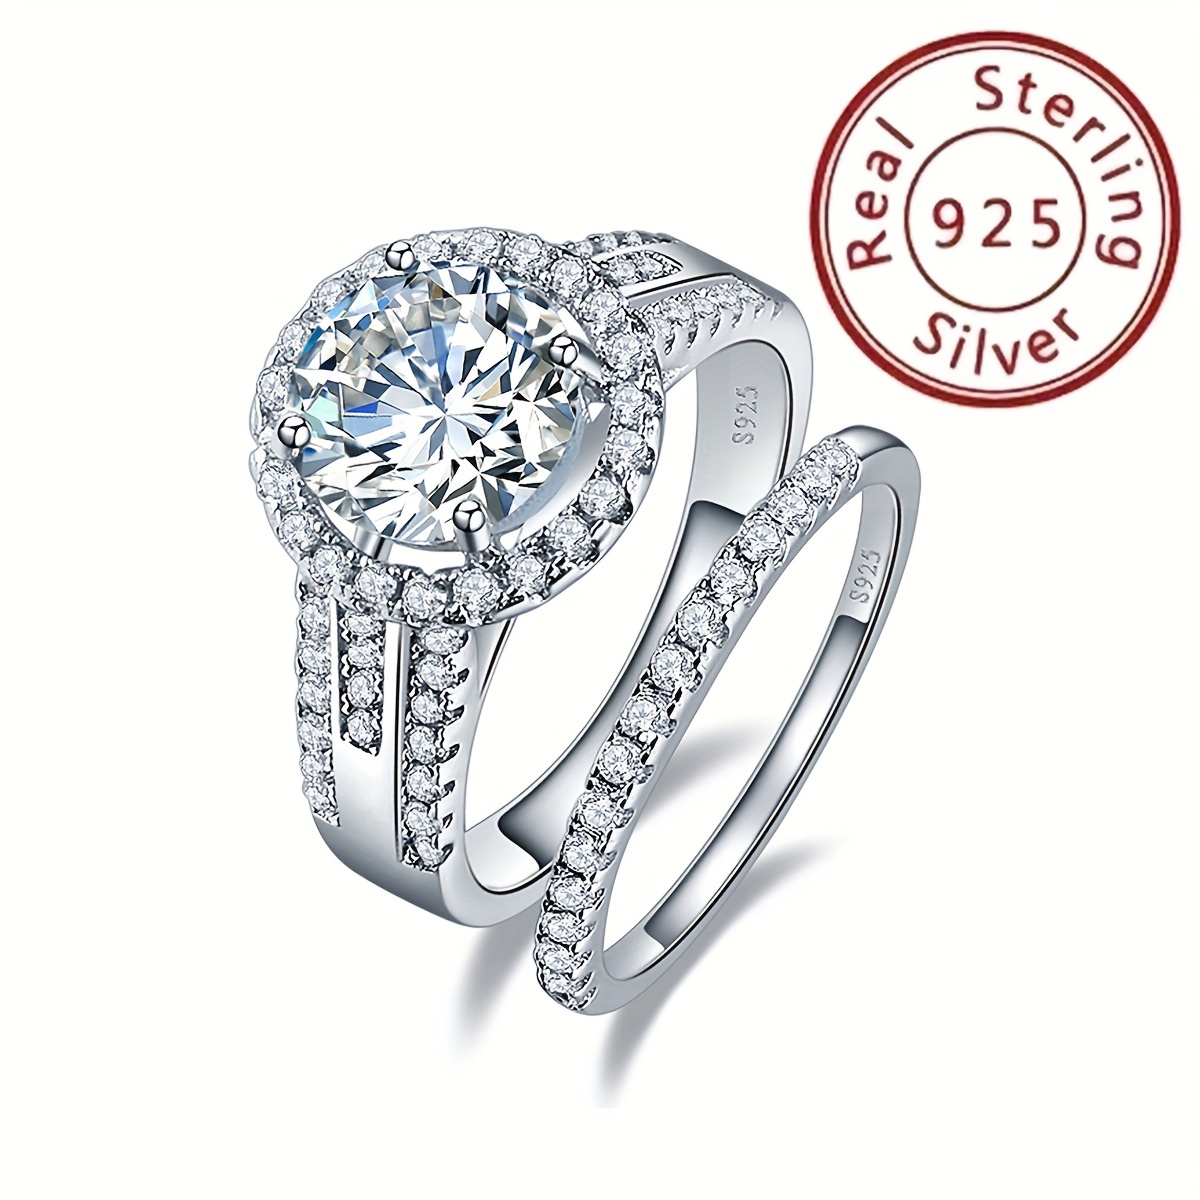 

100% 925 Sterling Silver, Gorgeous Elegant Shimmering Round Zircon Rings On Men's Wedding Gifts